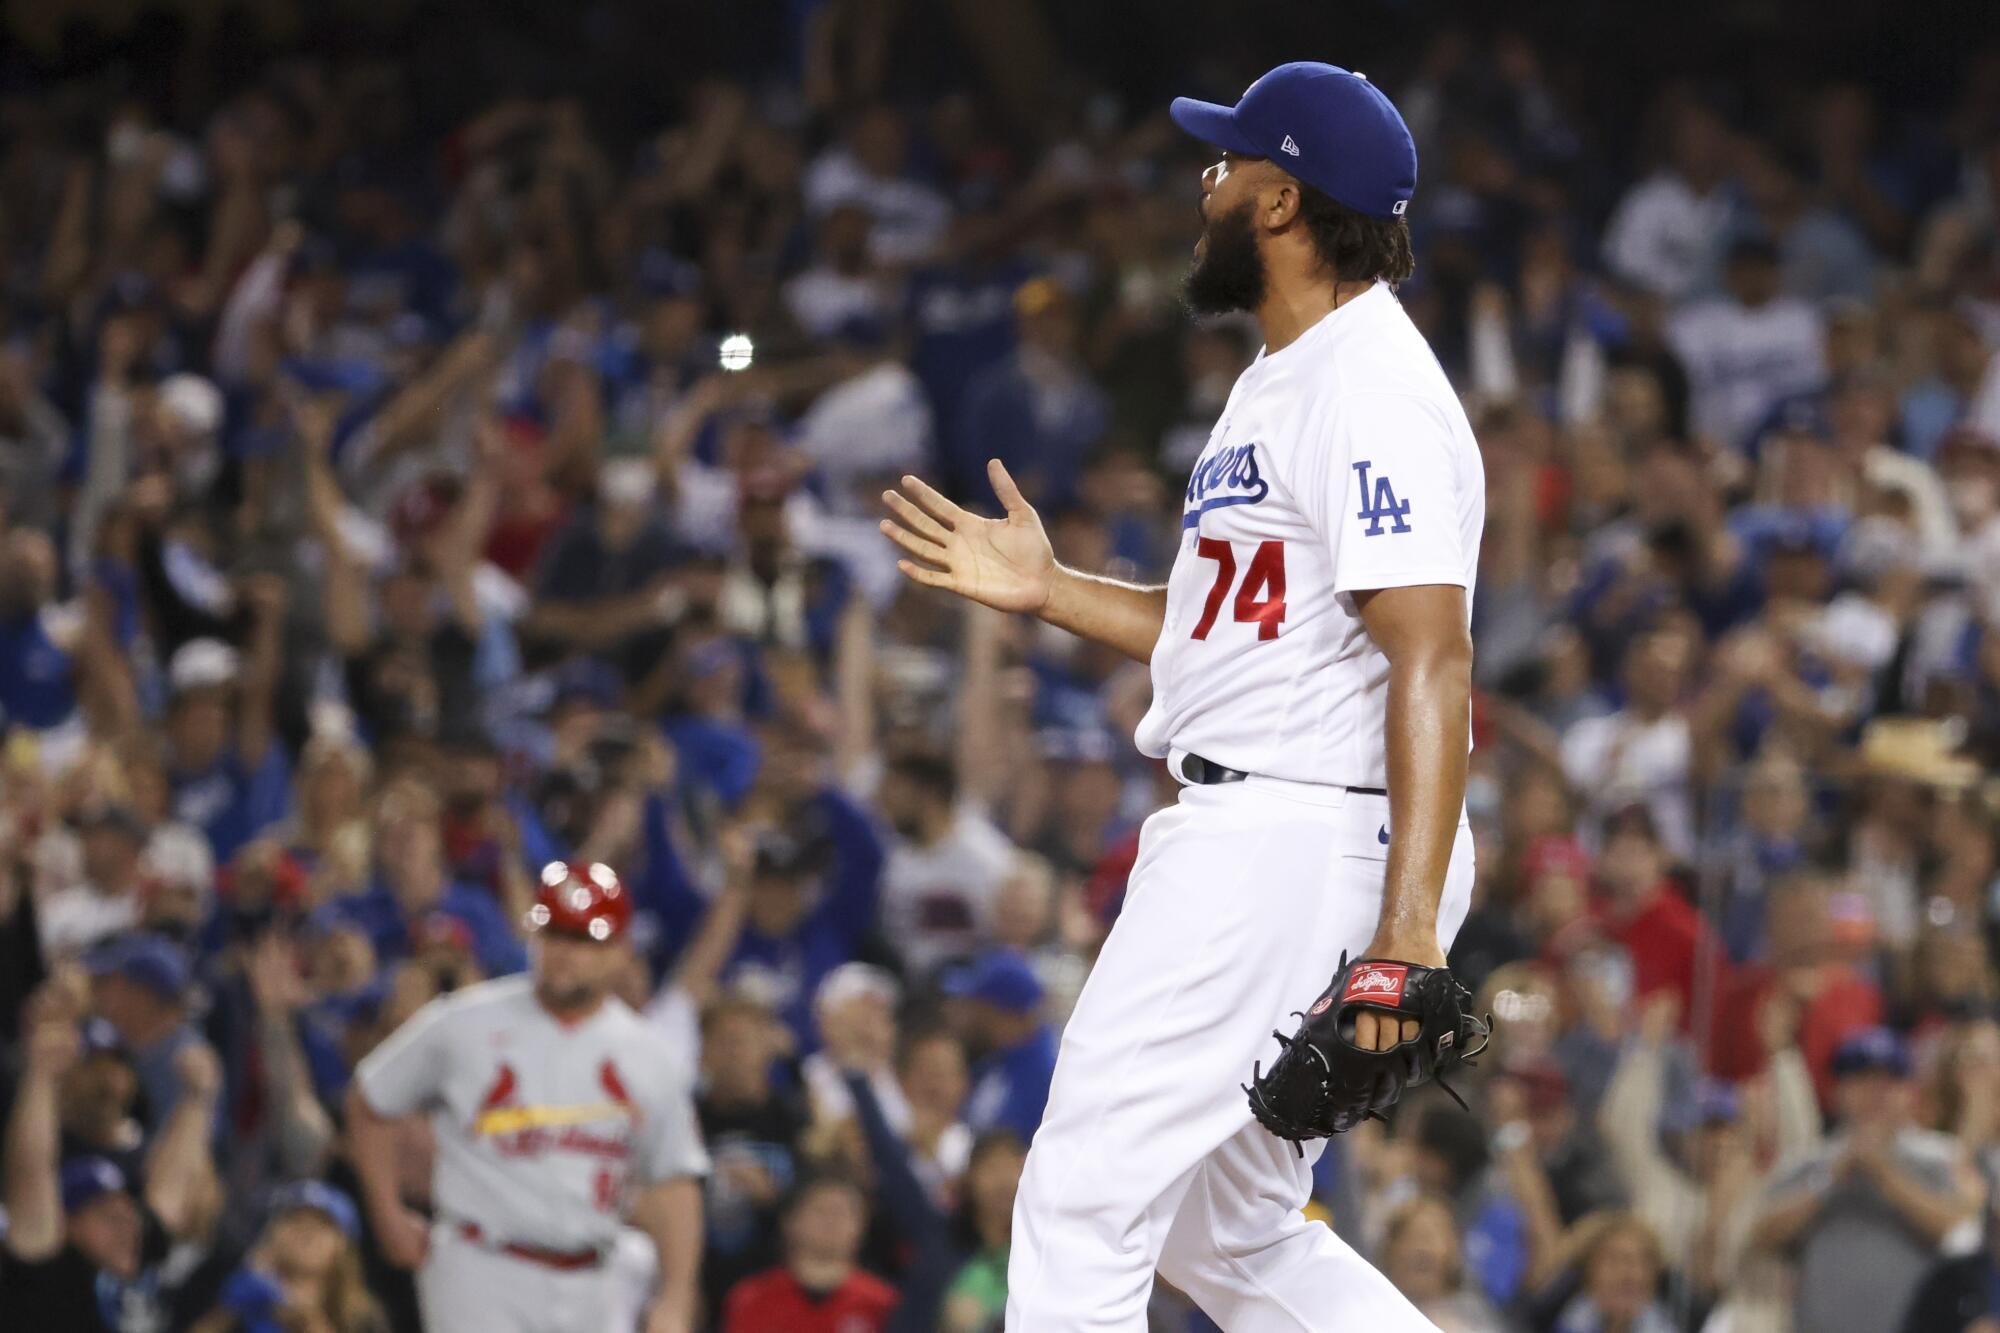 Los Angeles Dodgers relief pitcher Kenley Jansen reacts after a pitch